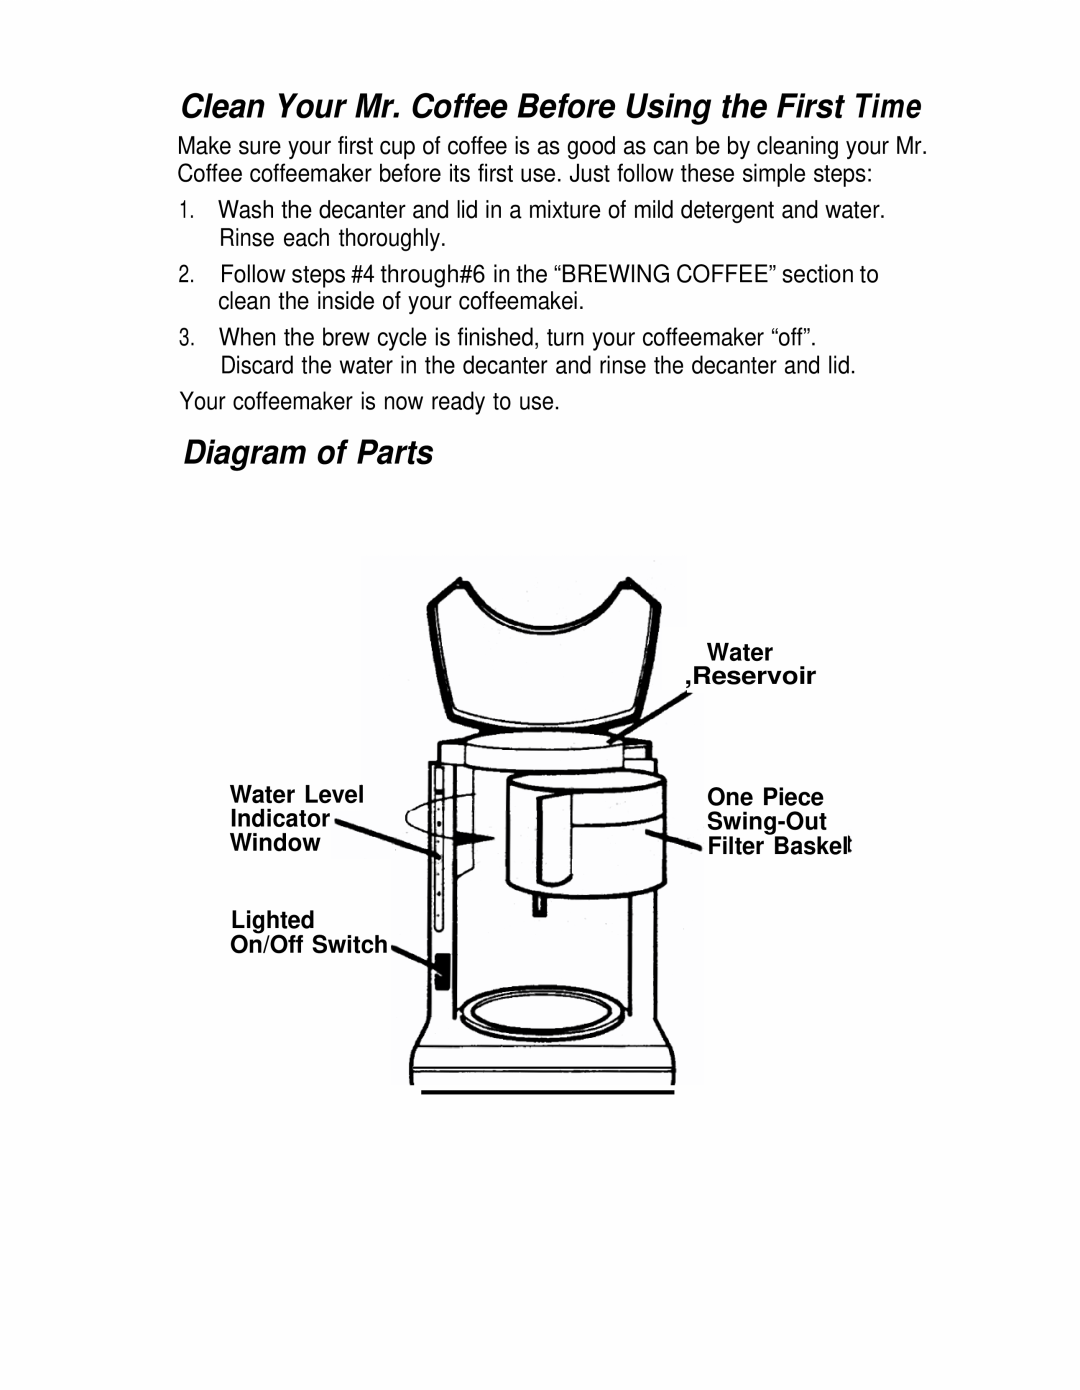 Mr. Coffee AD10 AND AD12 manual Clean Your Mr. Coffee Before Using the First Time, Diagram of Parts, On/Off Switch 